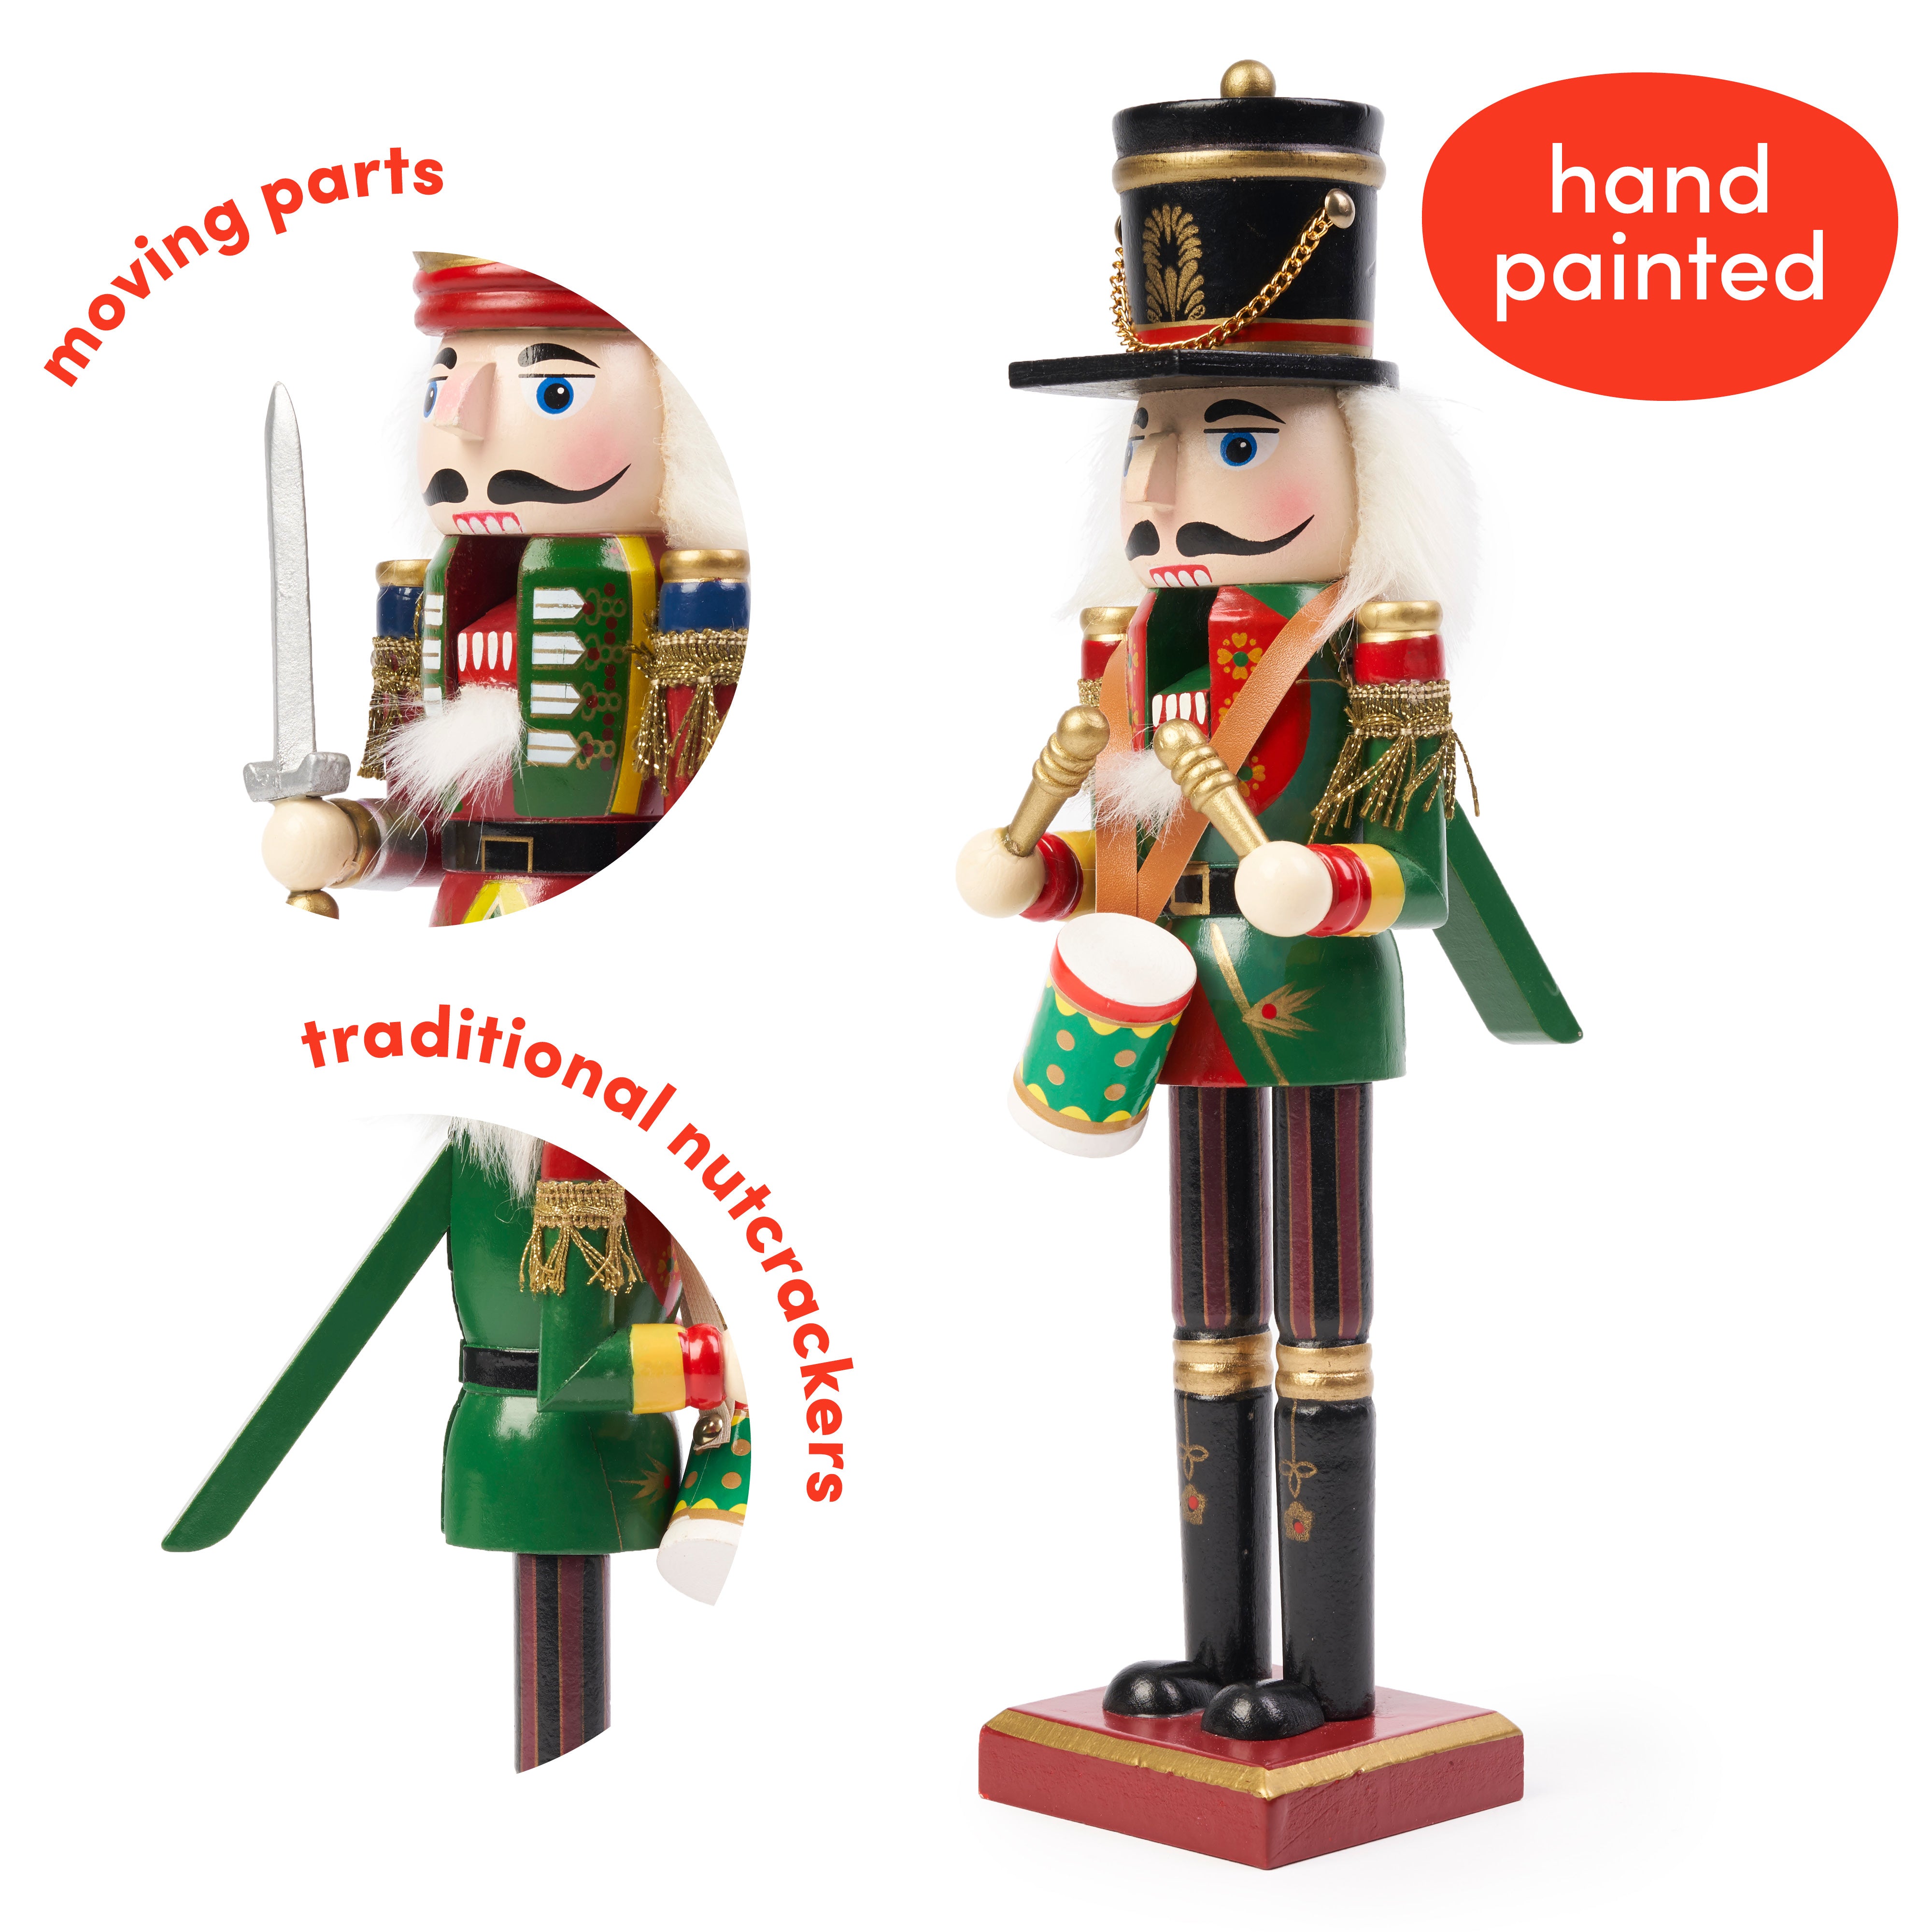 2 Wooden Christmas Nutcracker Soldiers